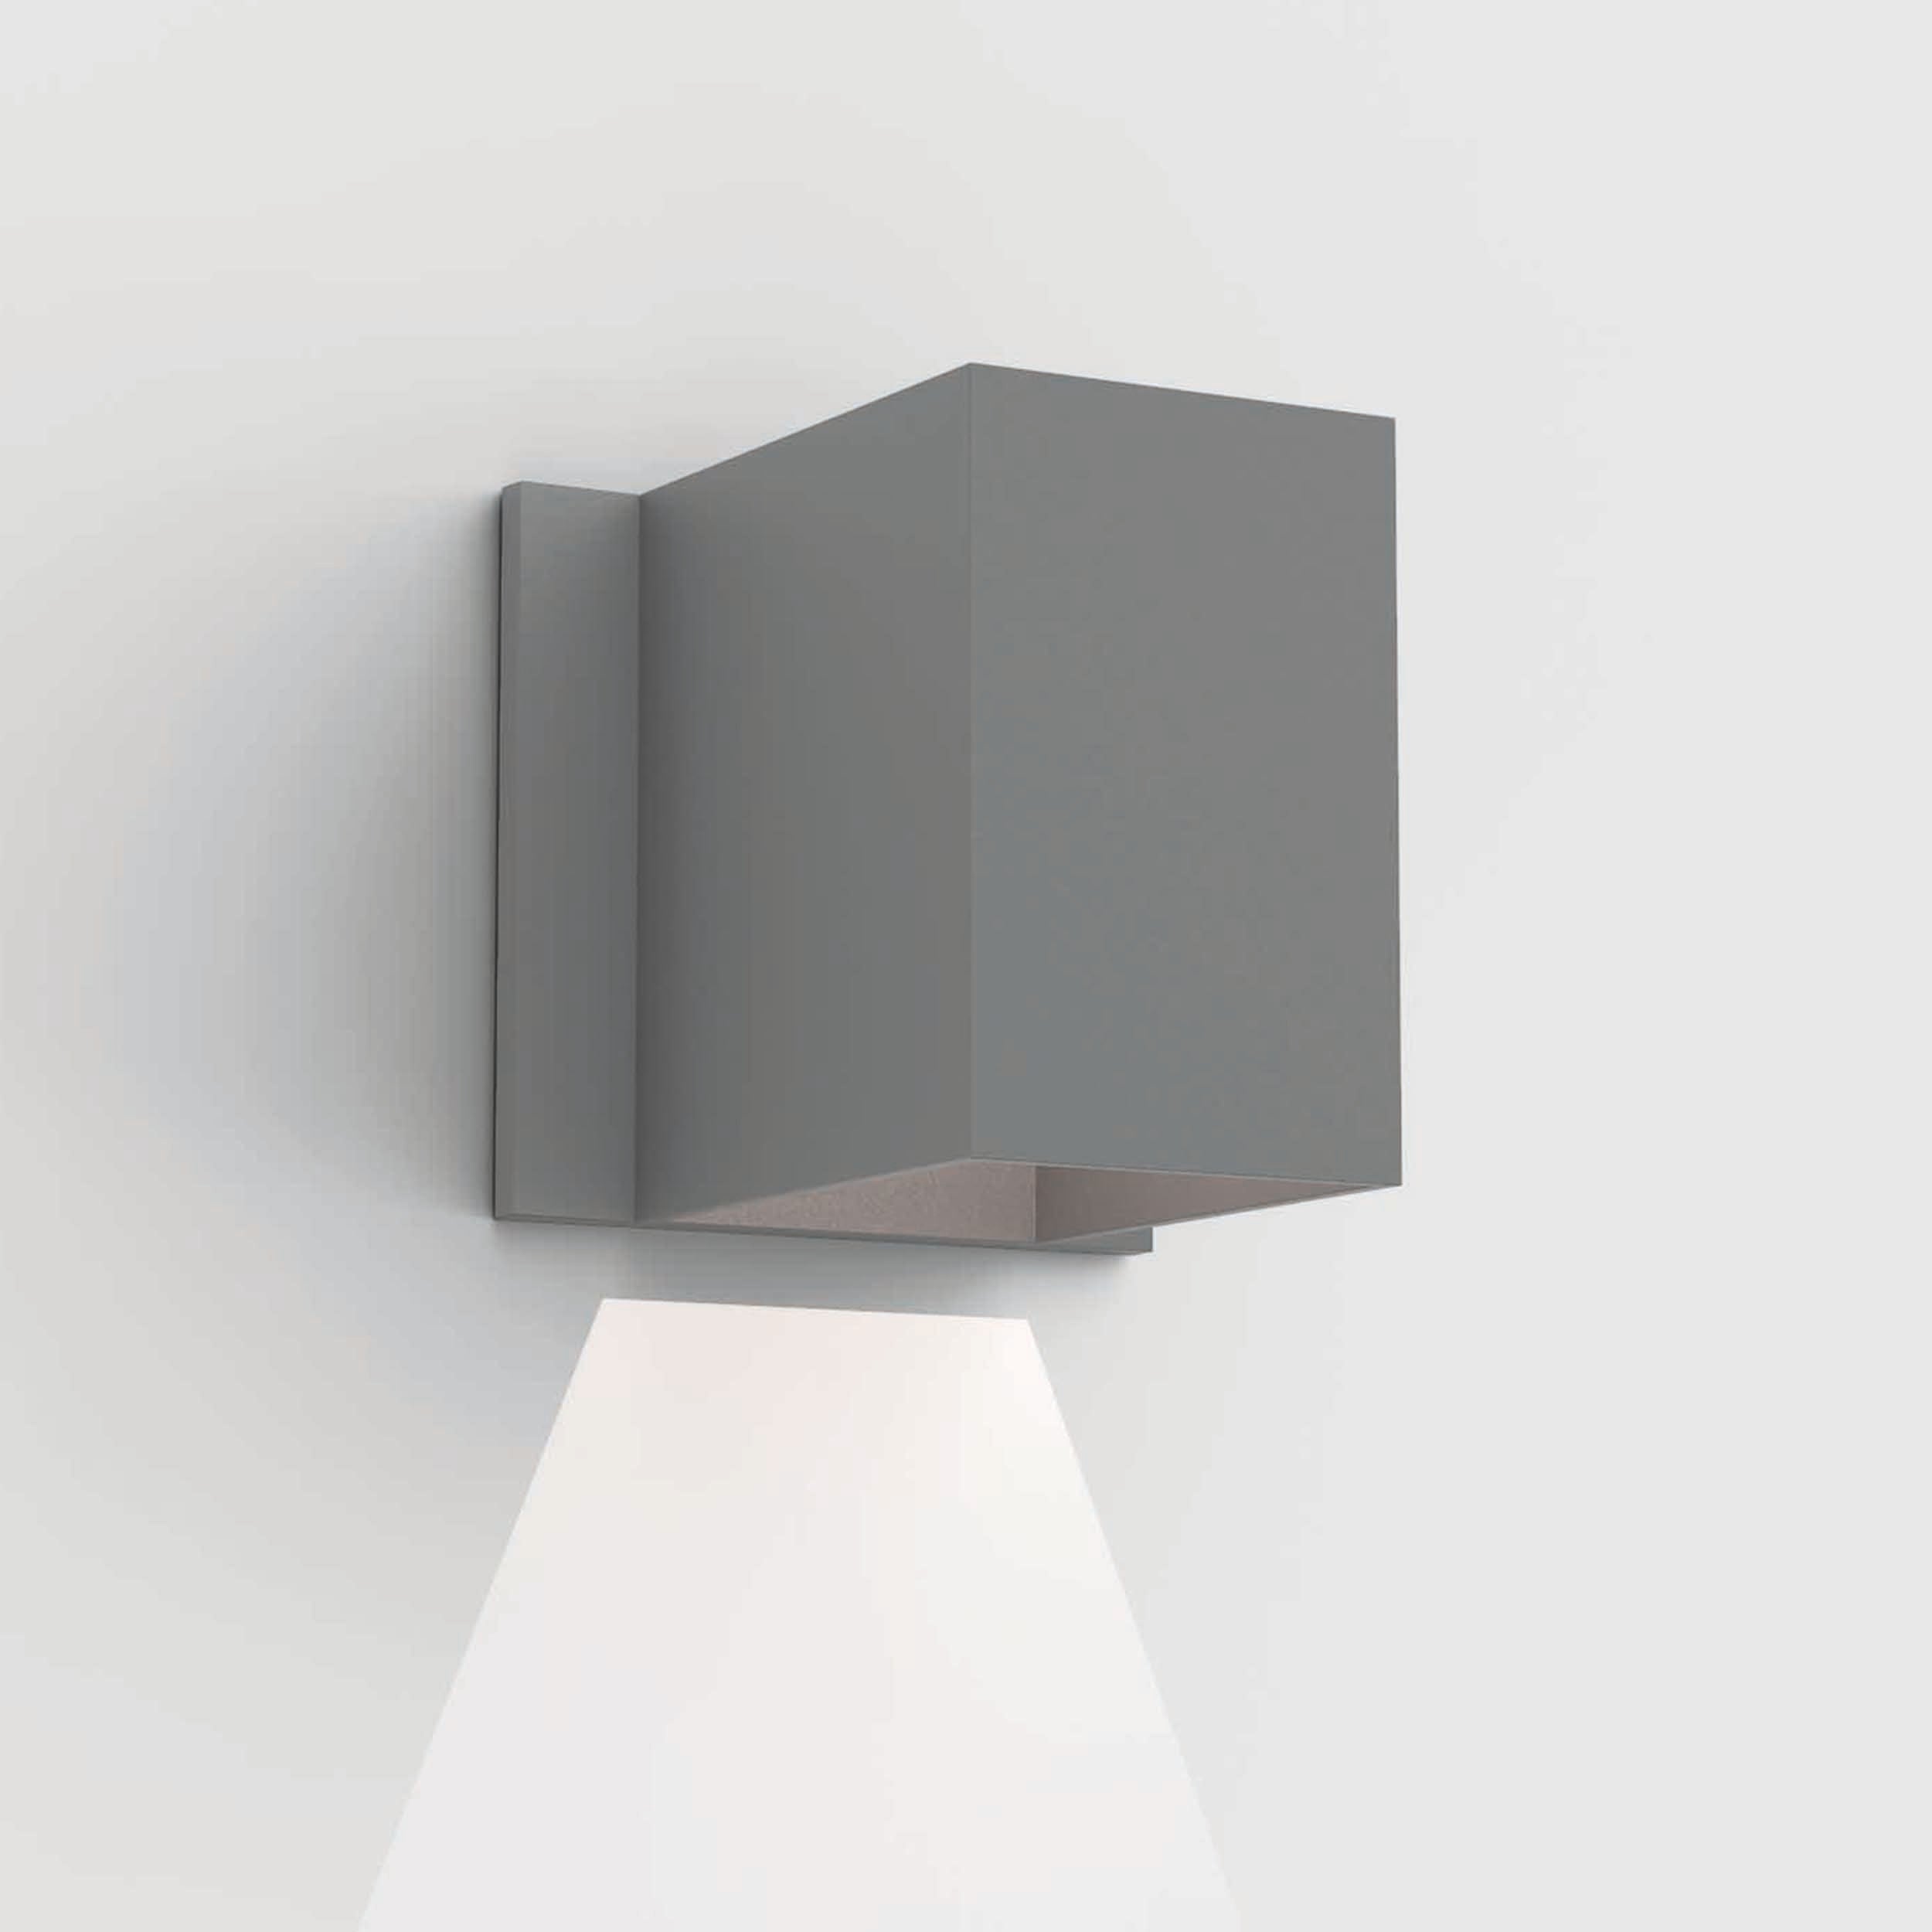 Astro Lighting Oslo Wall Light Fixtures Astro Lighting 4.17x4.33x4.33 Textured Grey Yes (Integral), High Power LED